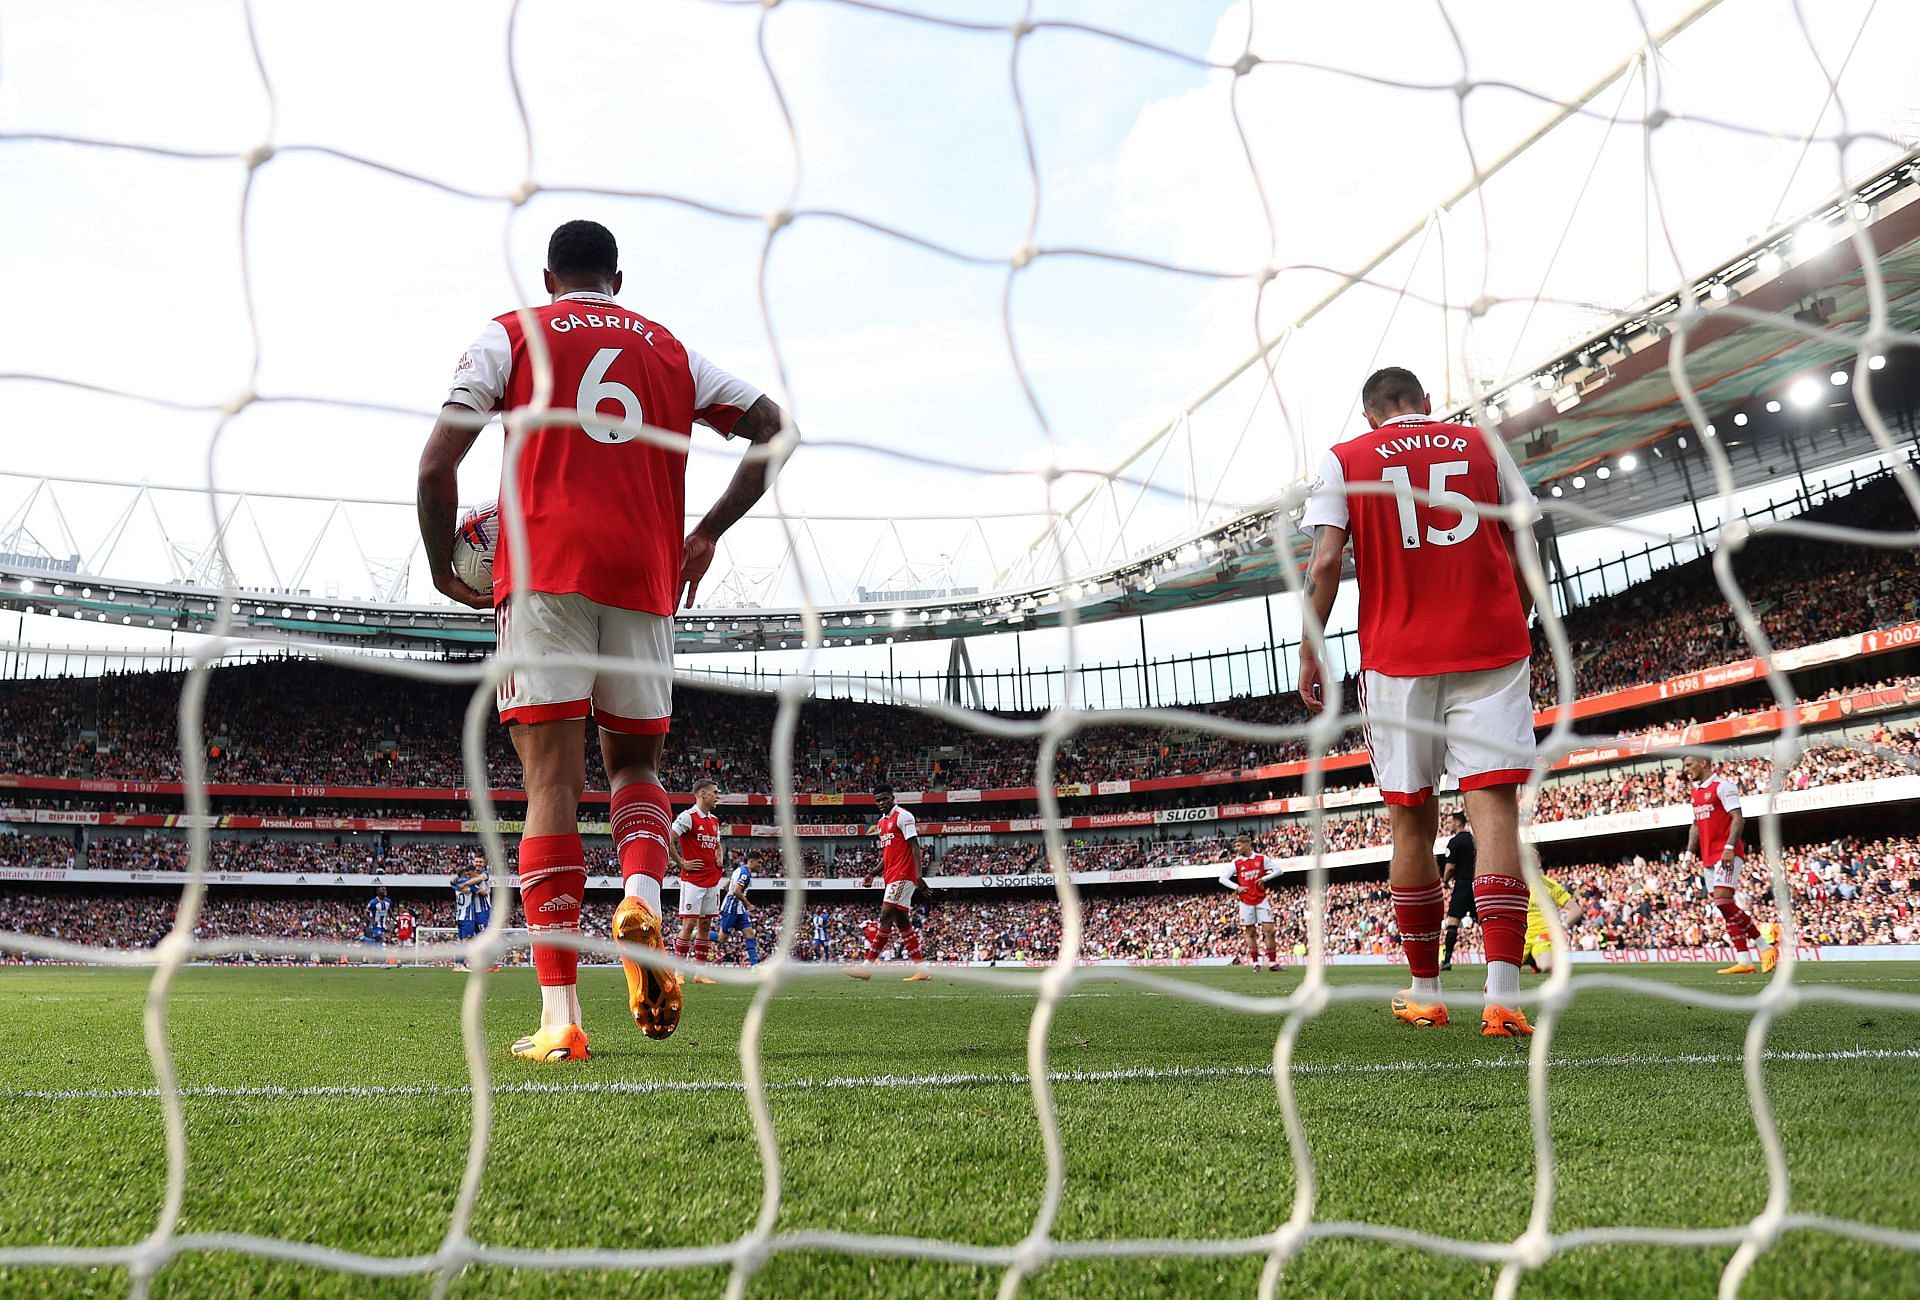 The Gunners suffered heartbreak in their title race.